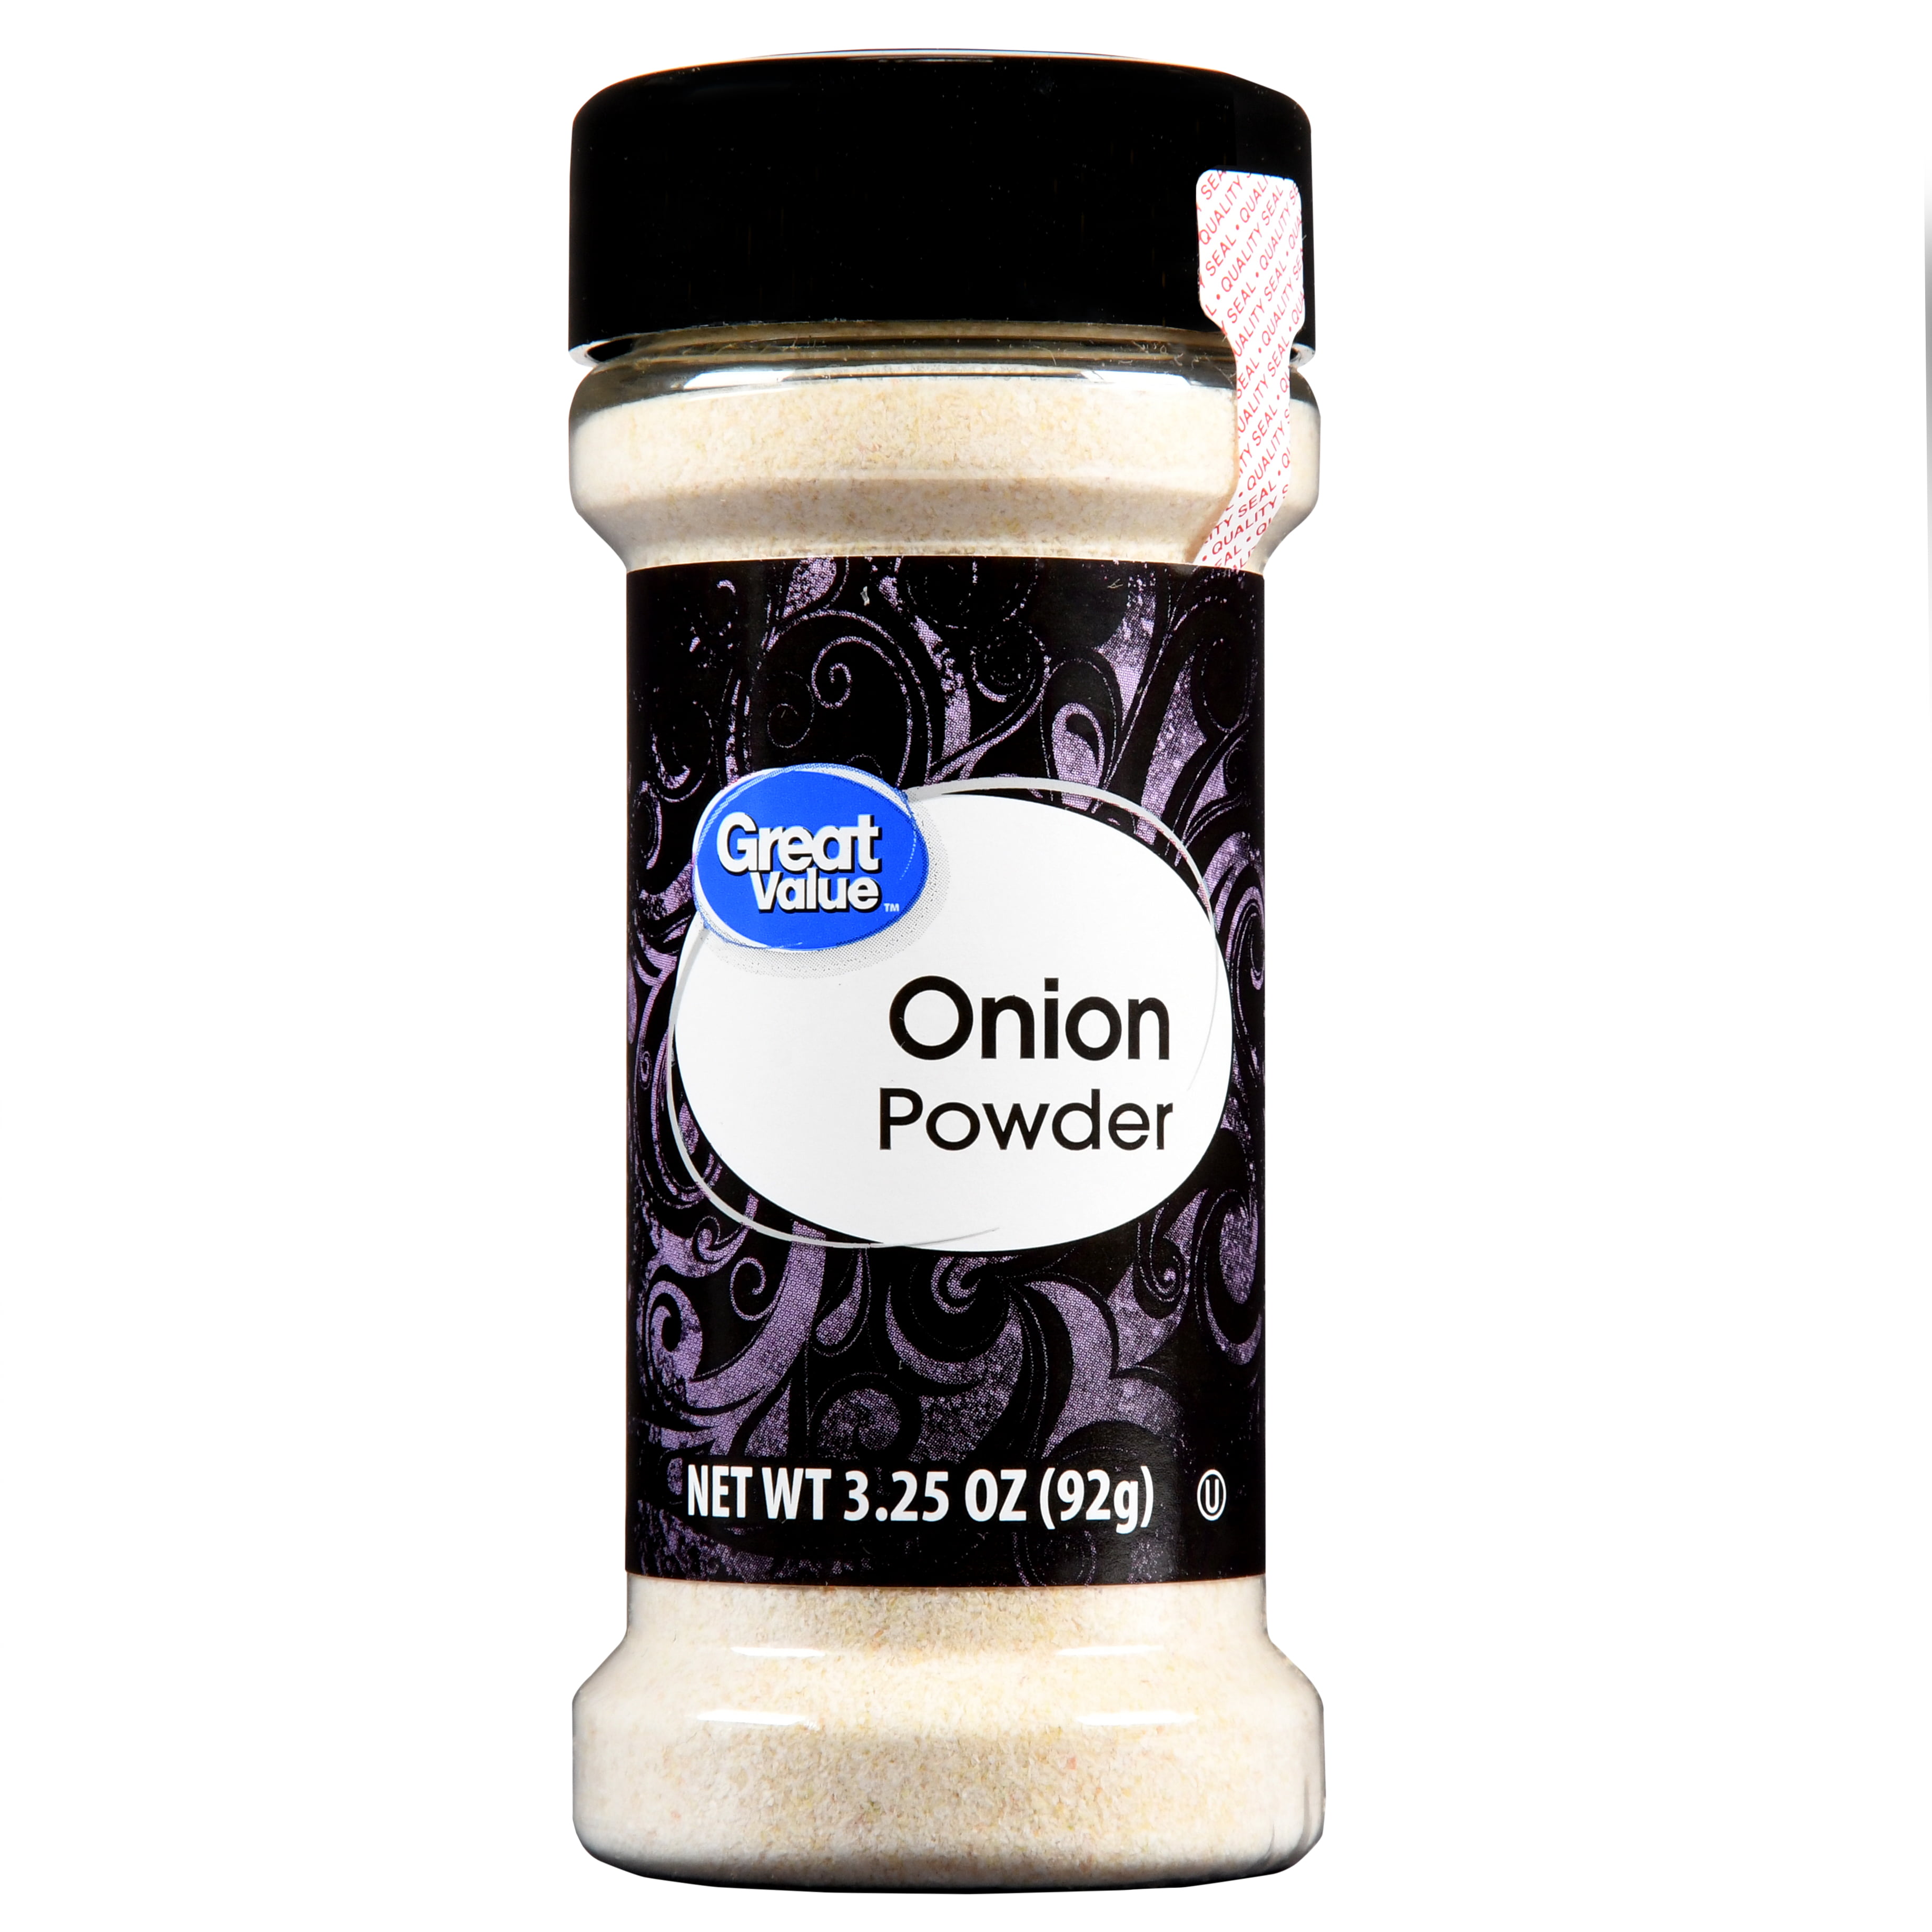 (3 pack) (3 pack) Great Value Onion Powder, 3.25 oz